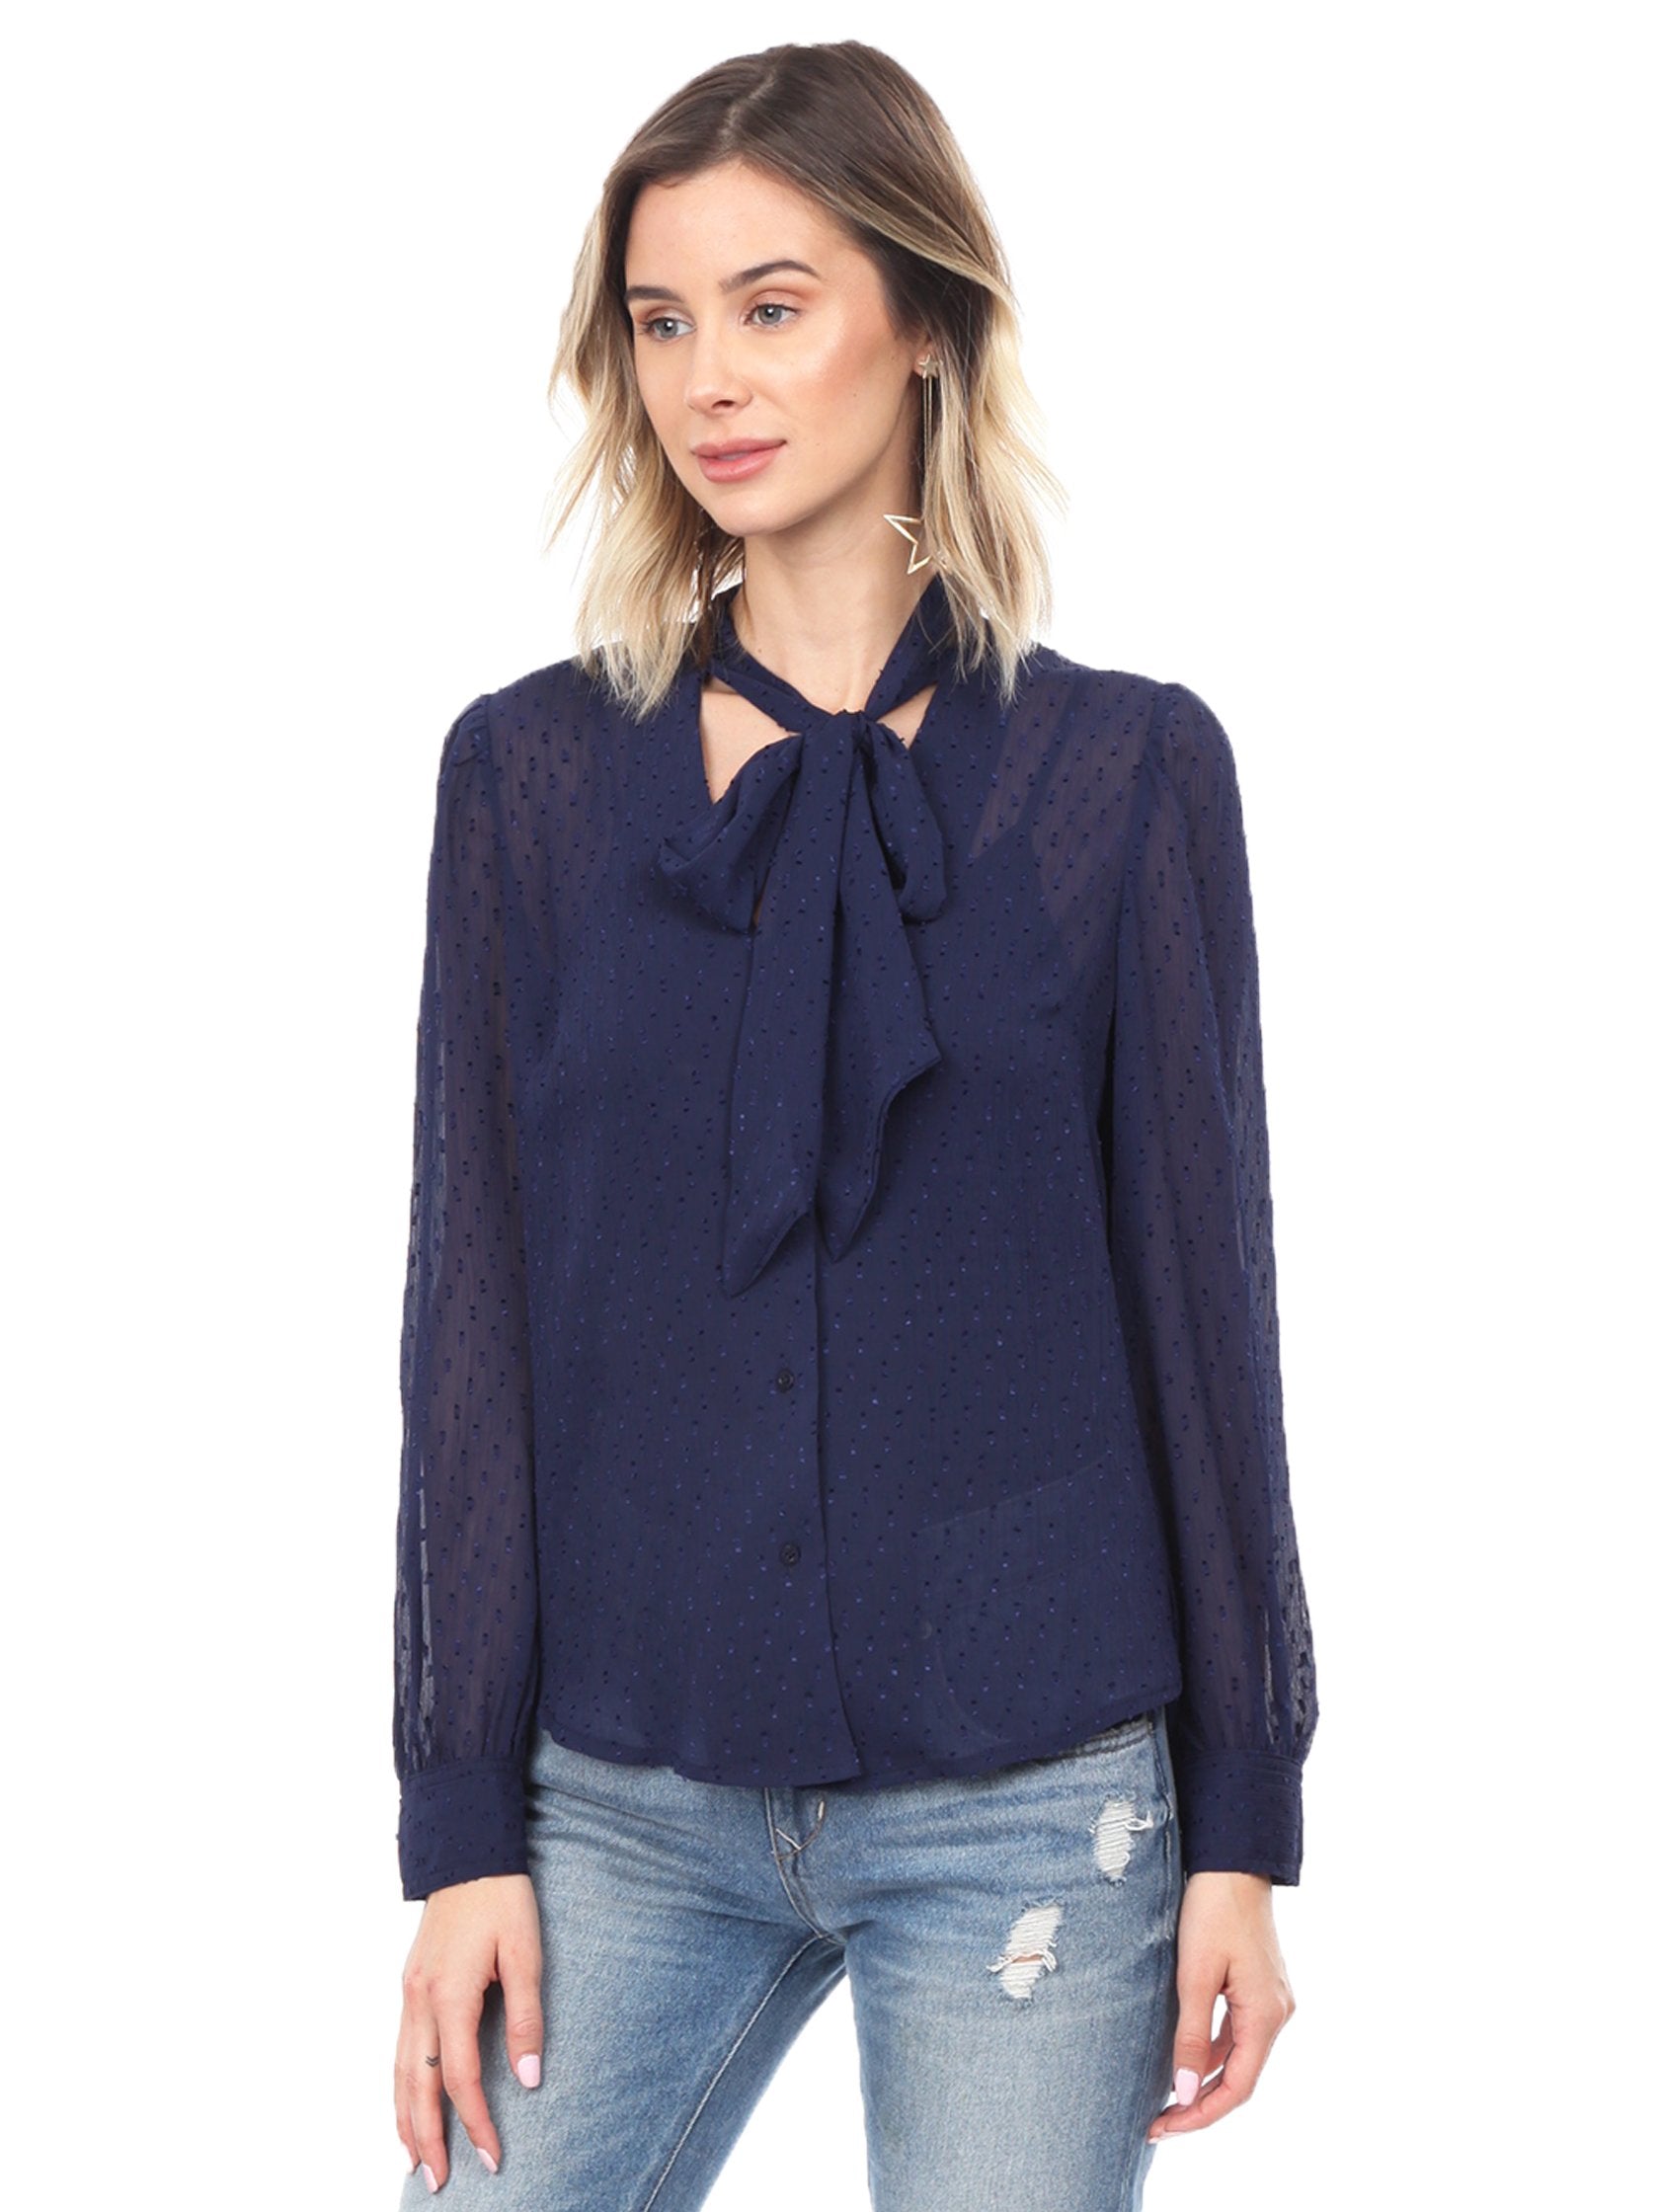 Woman wearing a top rental from FashionPass called Dottie Long Sleeve Blouse